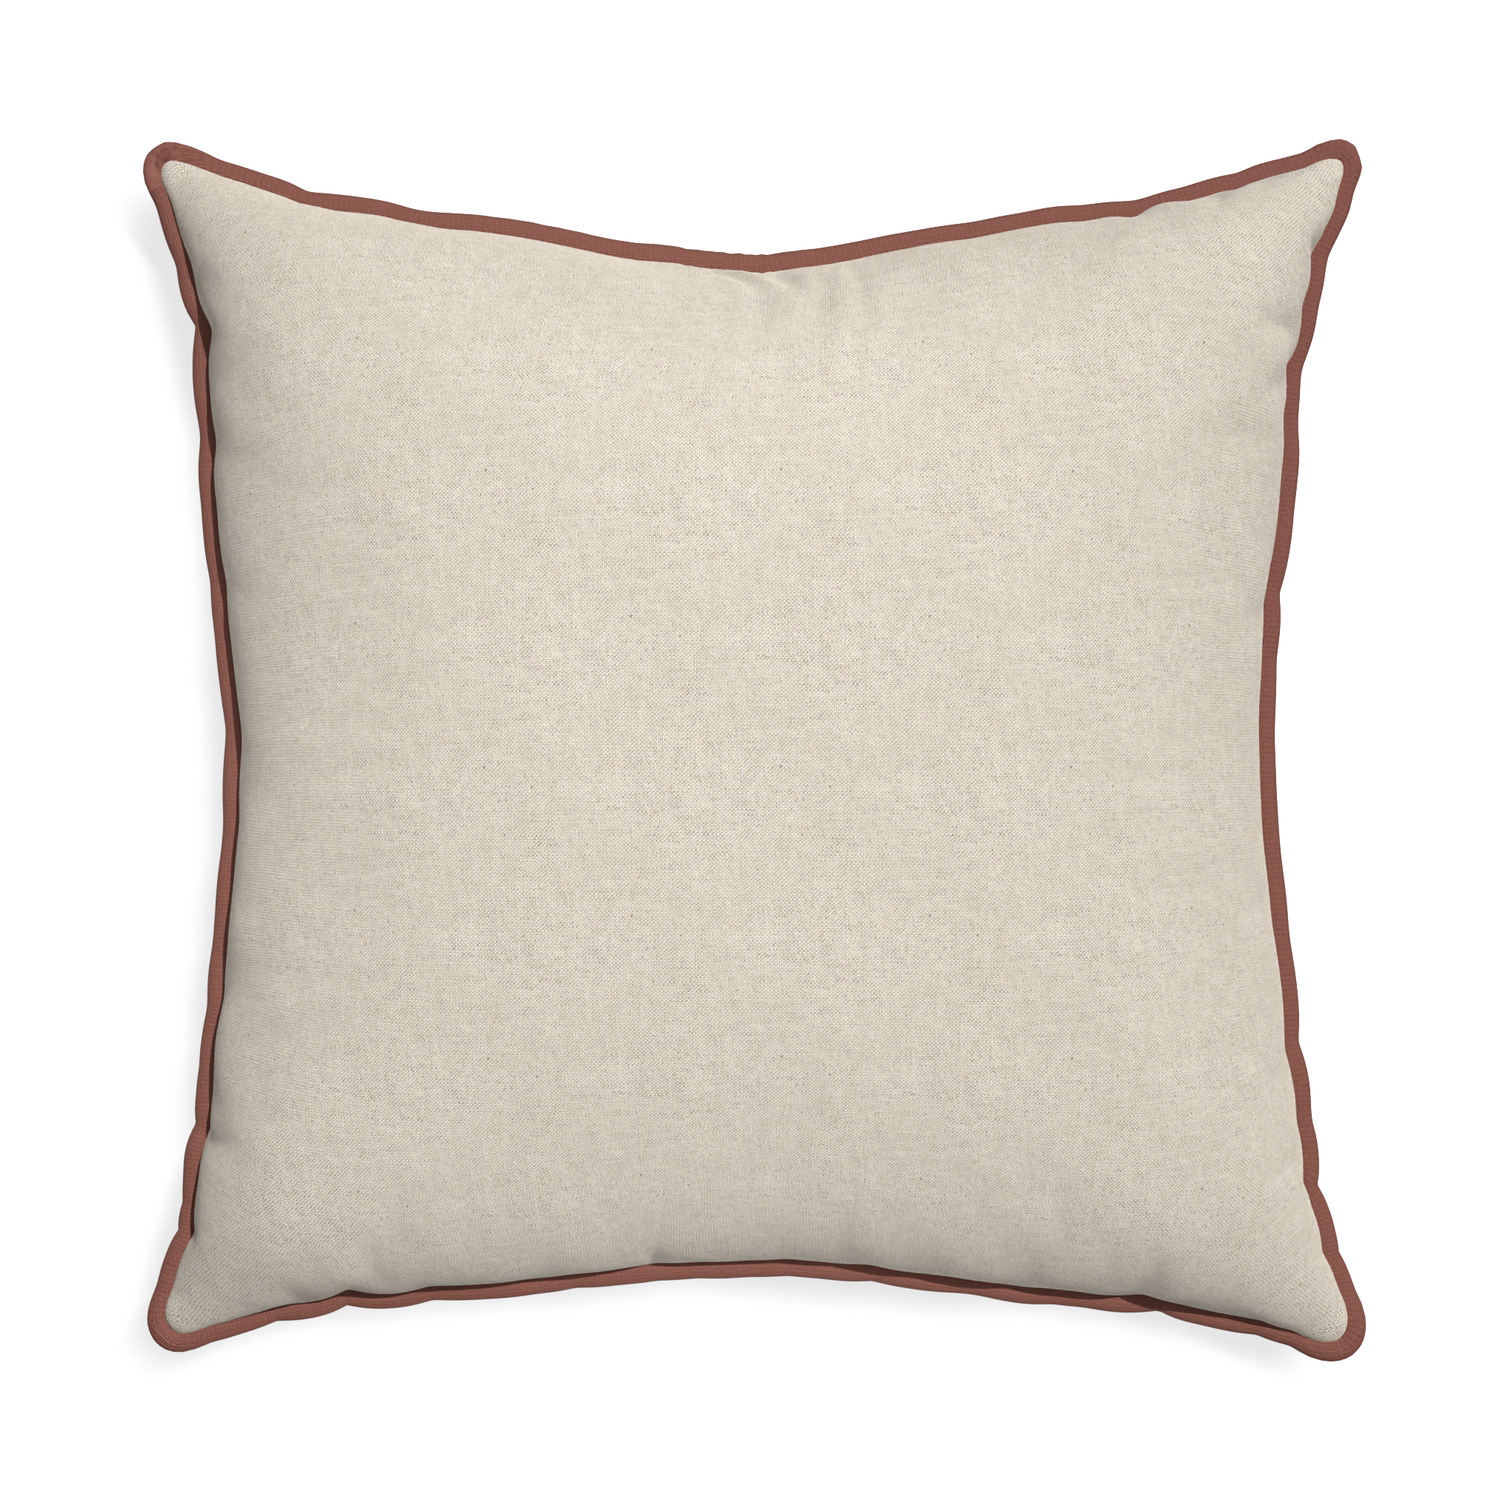 Euro-sham oat custom pillow with w piping on white background